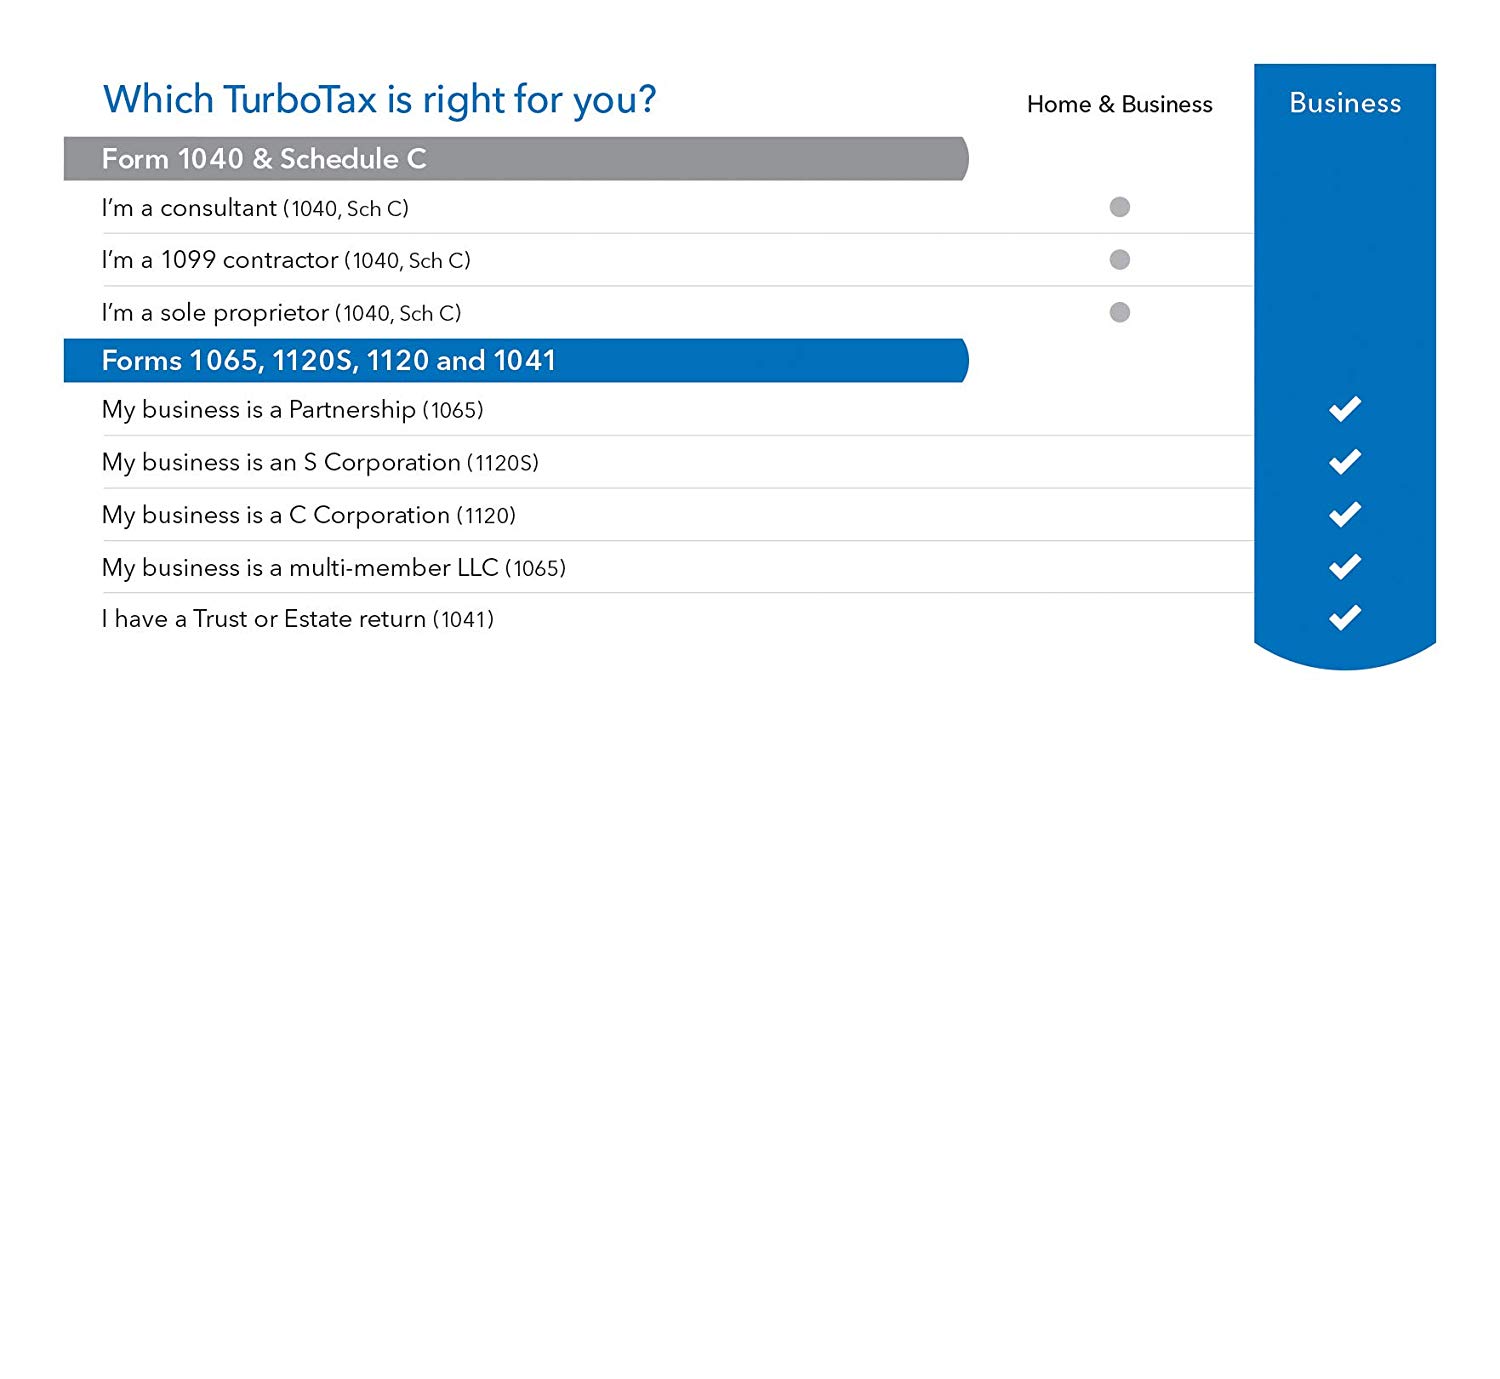 turbotax for mac download 2016